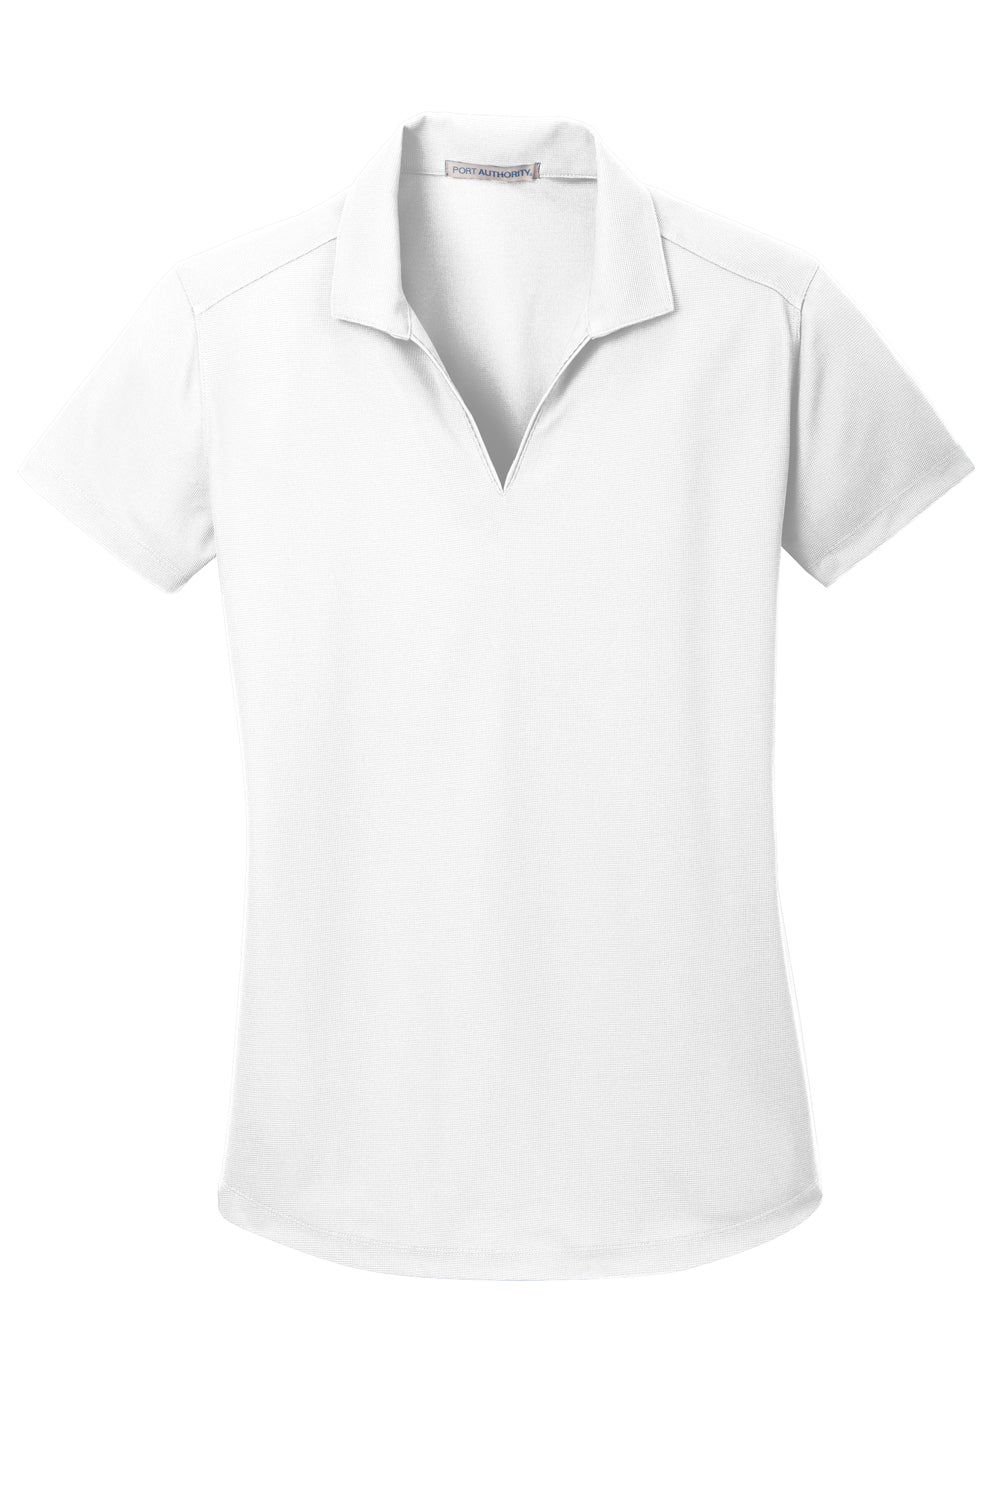 Port Authority L572 Womens Dry Zone Moisture Wicking Short Sleeve Polo Shirt White Flat Front